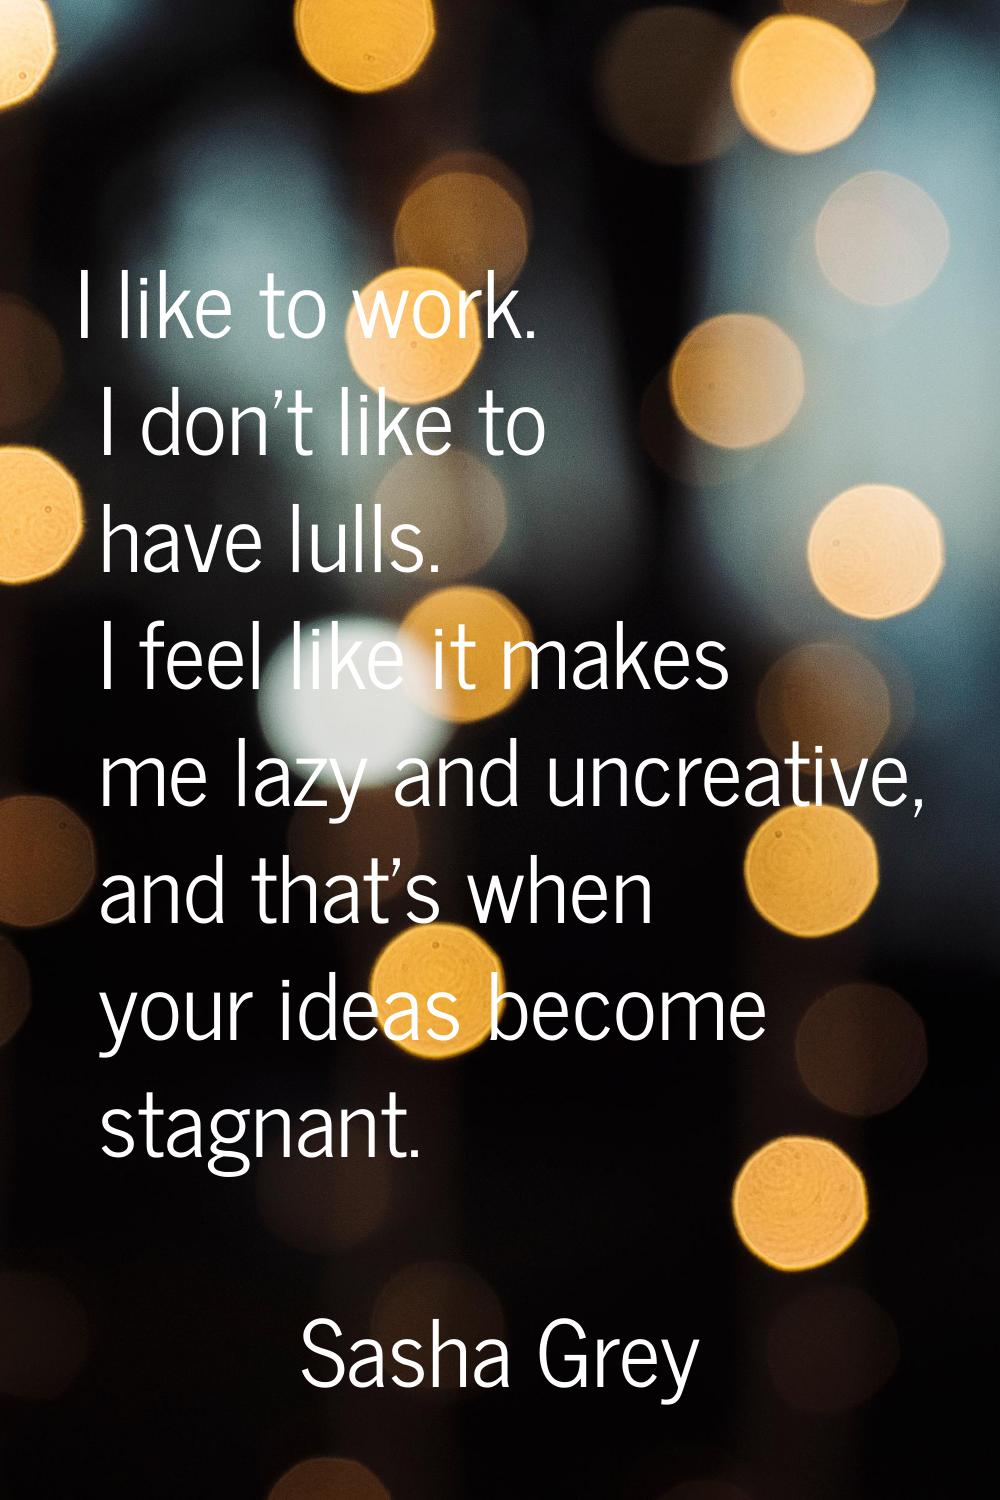 I like to work. I don't like to have lulls. I feel like it makes me lazy and uncreative, and that's